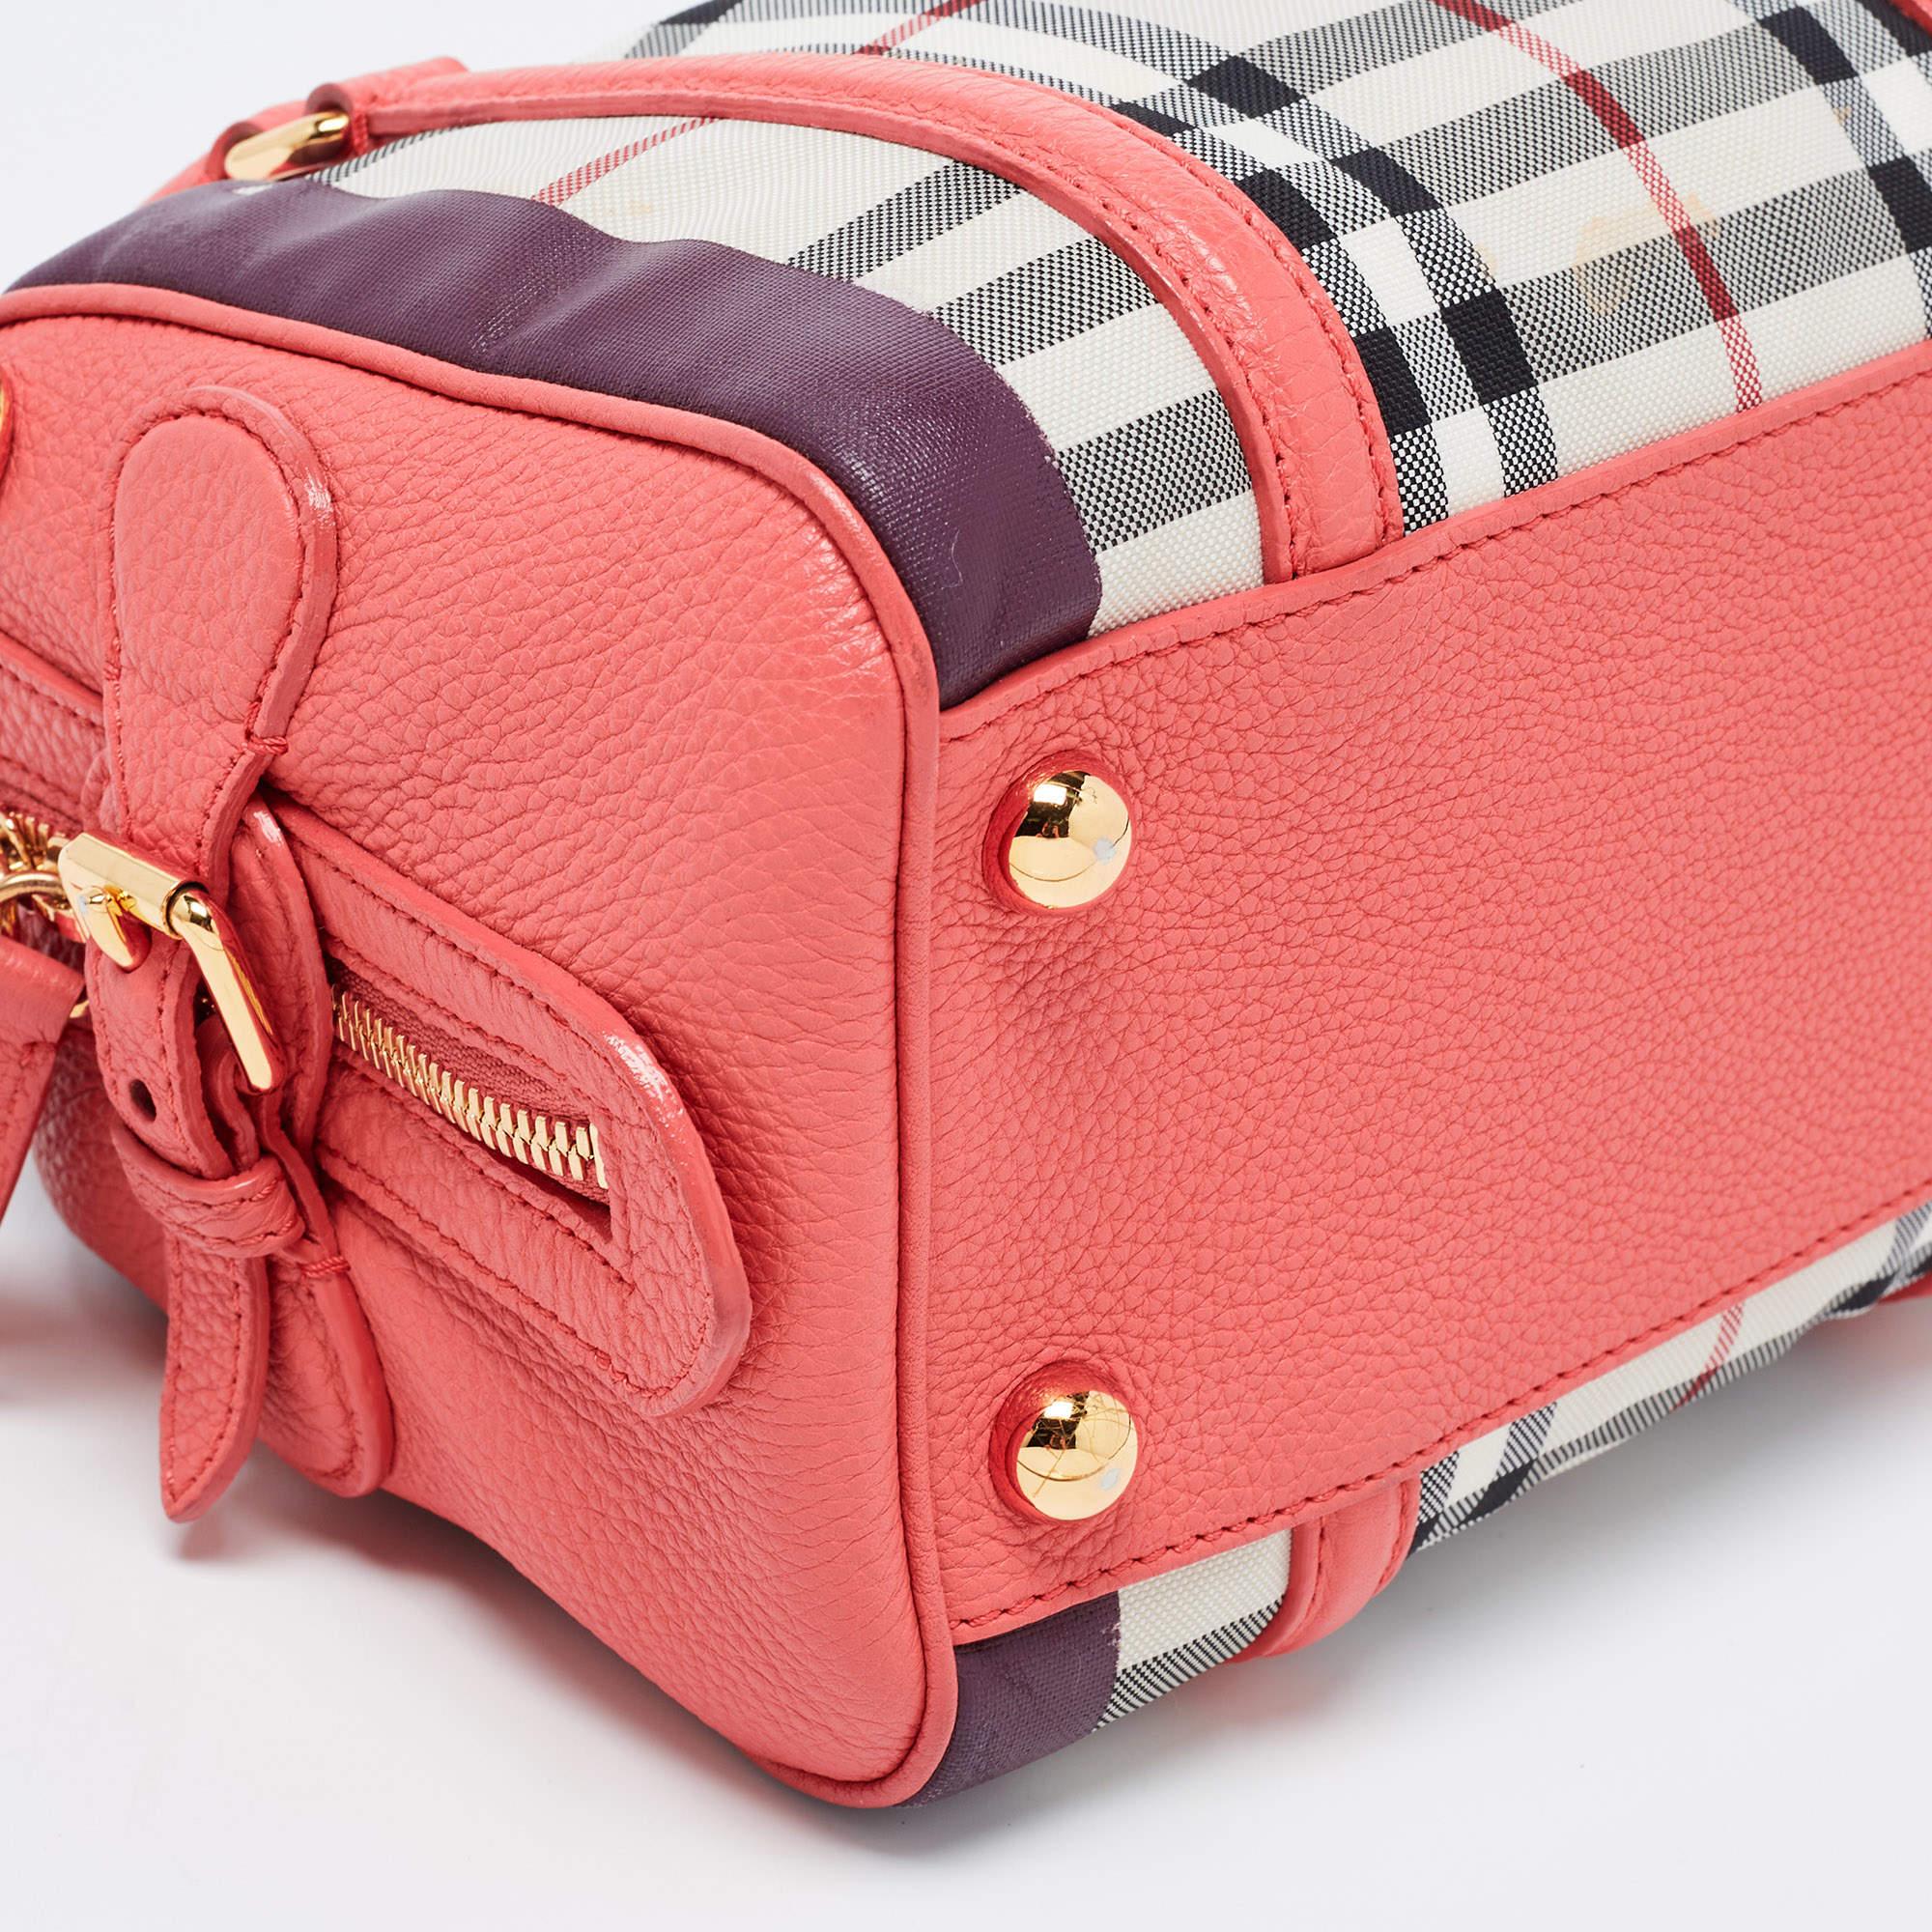 Burberry Prorsum Pink Haymarket Check Coated Canvas and Leather Mini Bee Bag 9